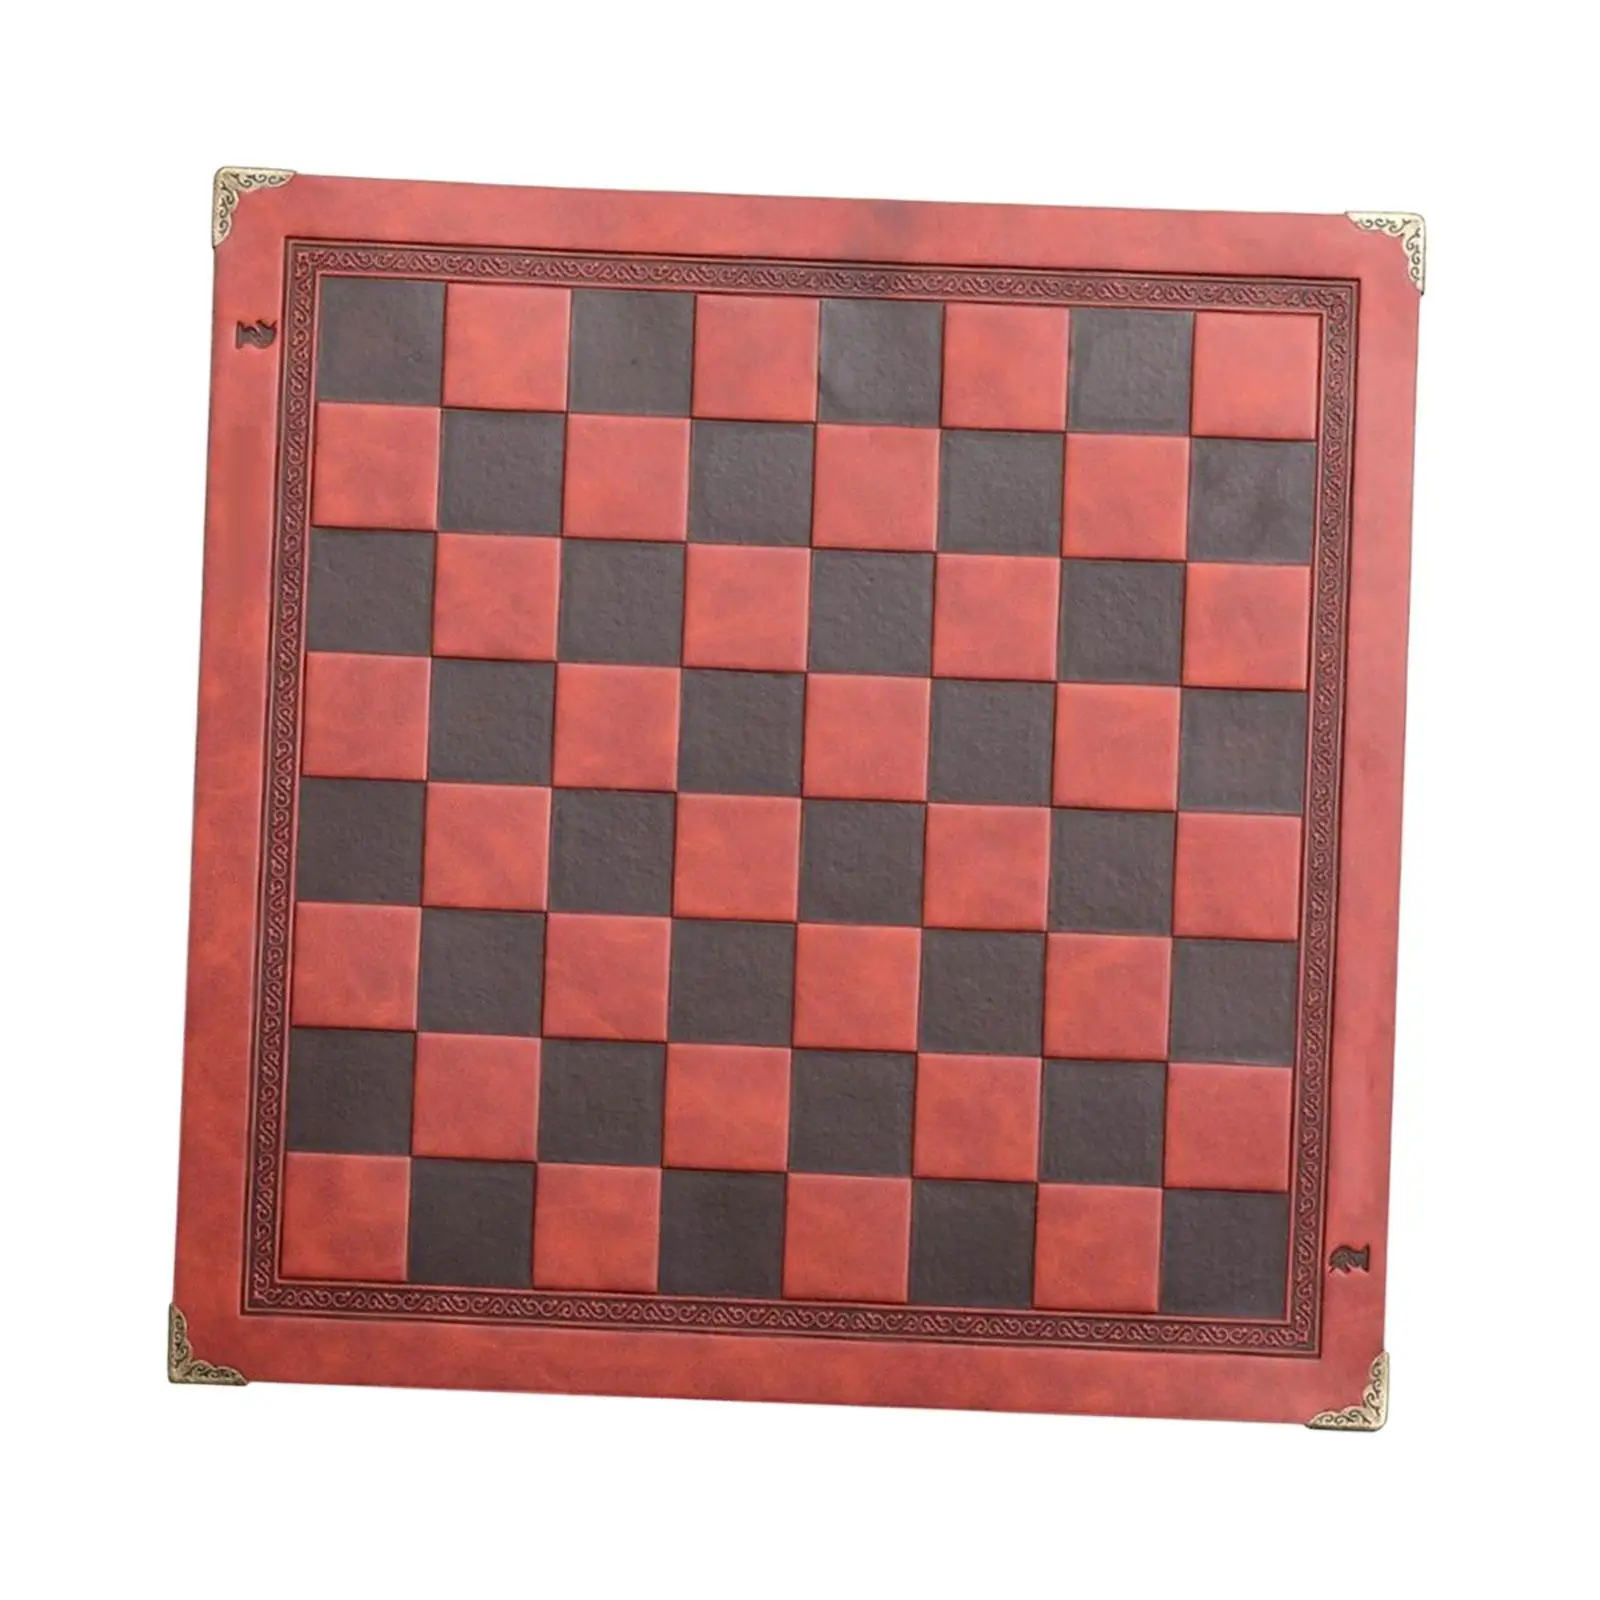 Chessboard Mat Waterproof Antiskid Wipeable Heat Resistant Chess Pad Mat for Chess Club Table Counter Top Patio Table Game